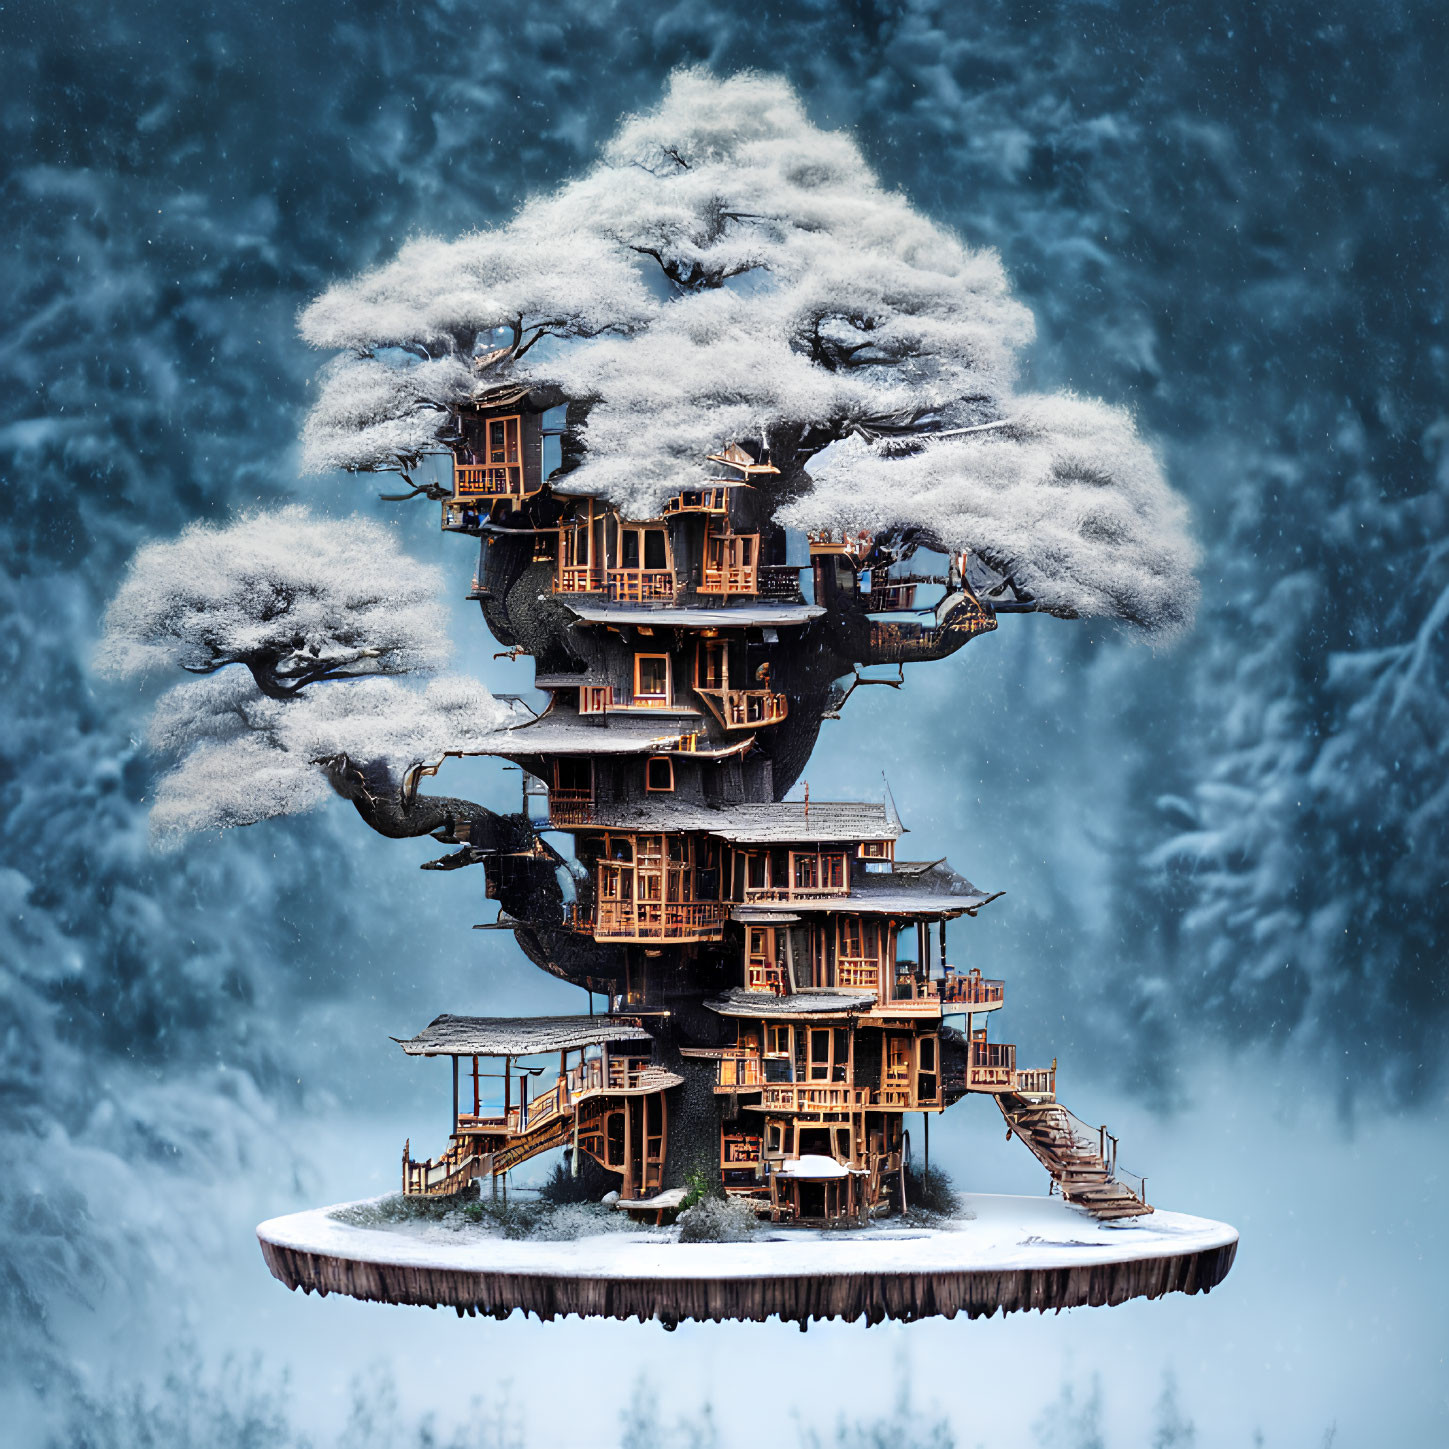 Snow-covered pine treehouse in wintry forest with falling snowflakes